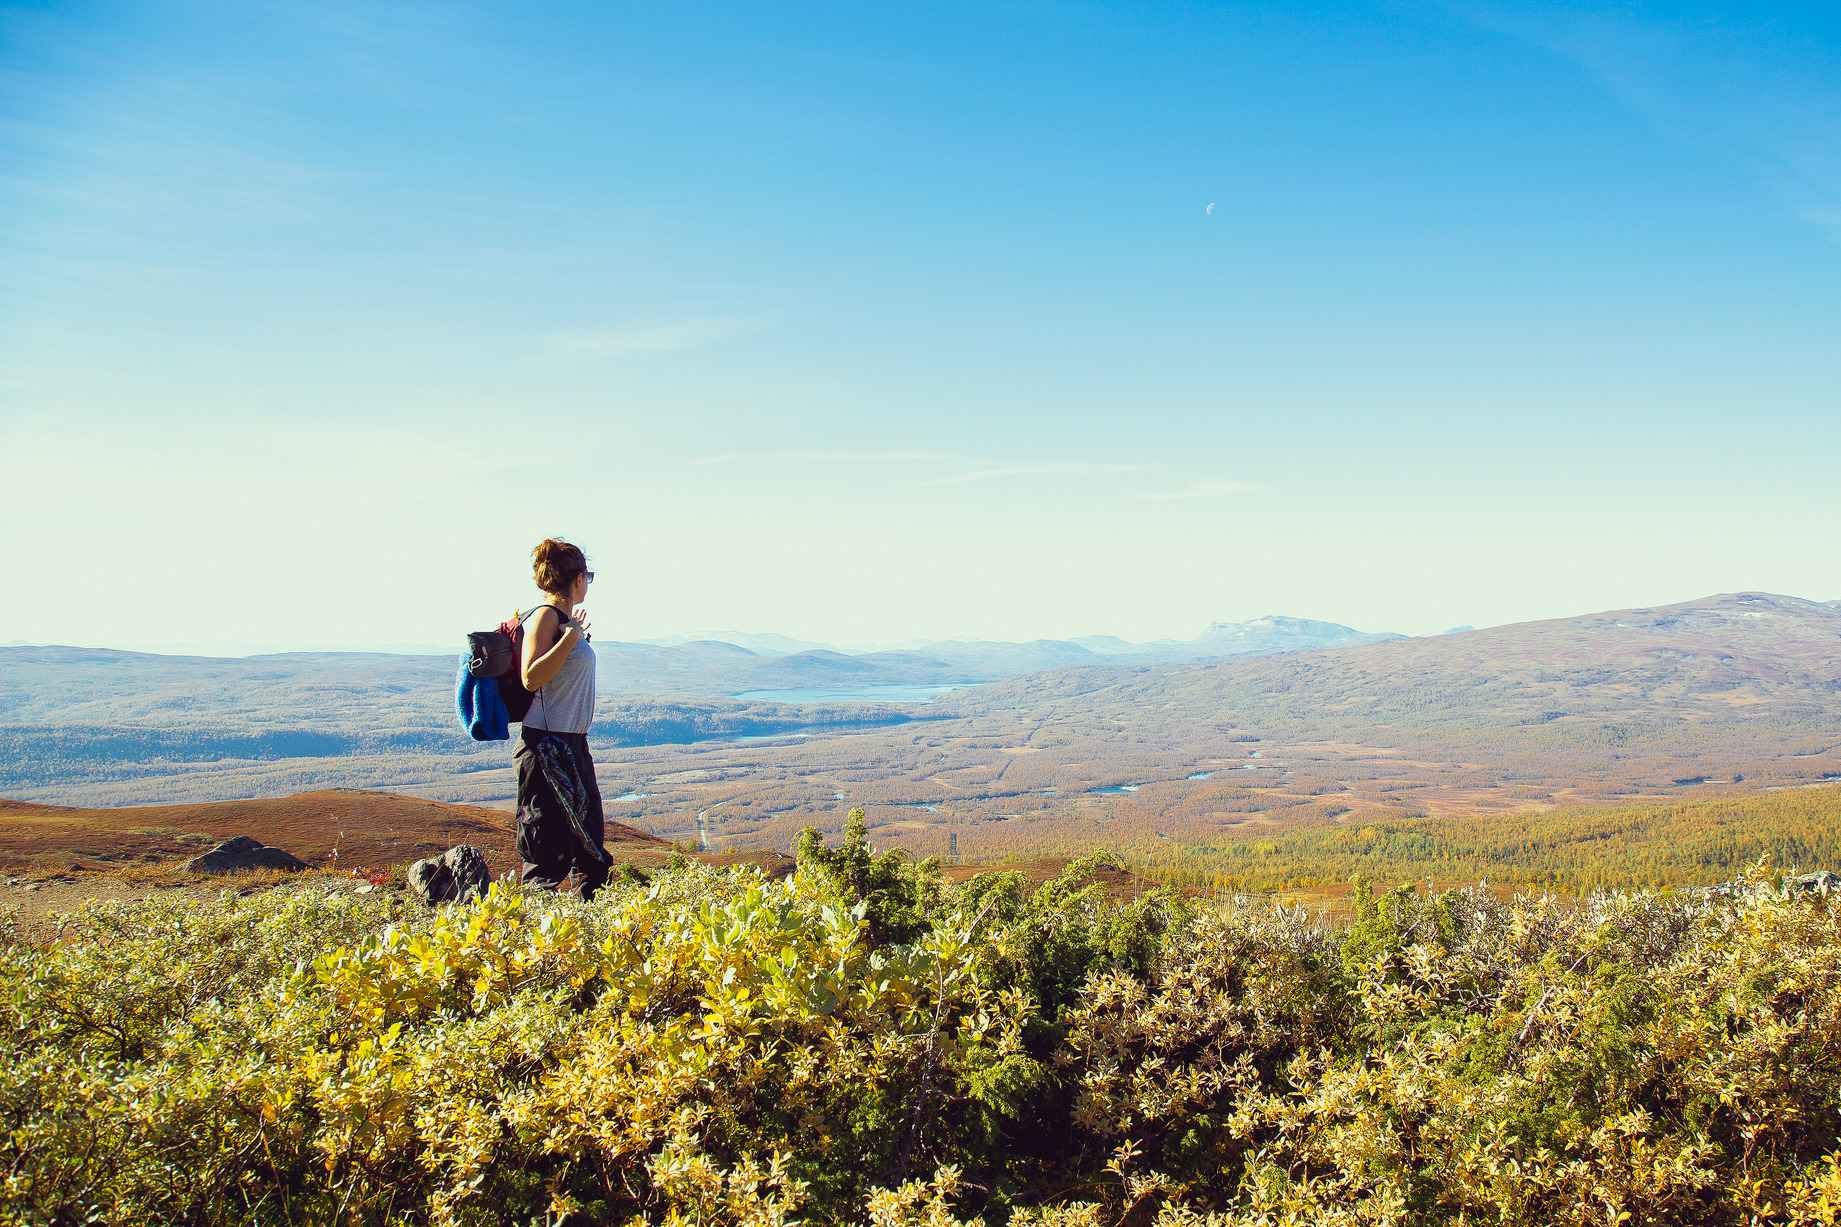 Woman hiking with a backpack, gazing out over mountainous terrain on a sunny day.